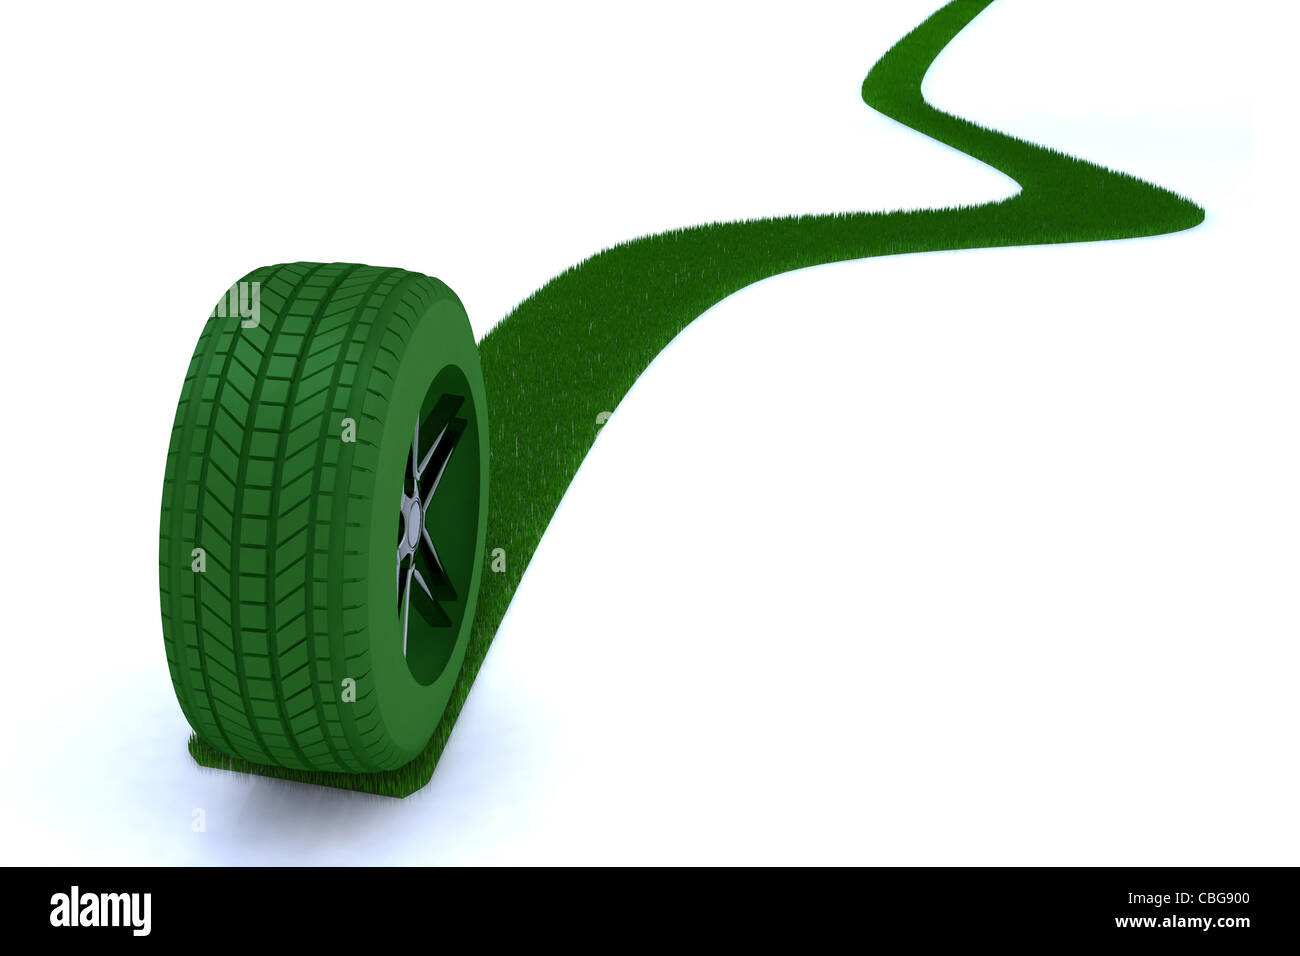 green path from a wheel 3d illustration Stock Photo